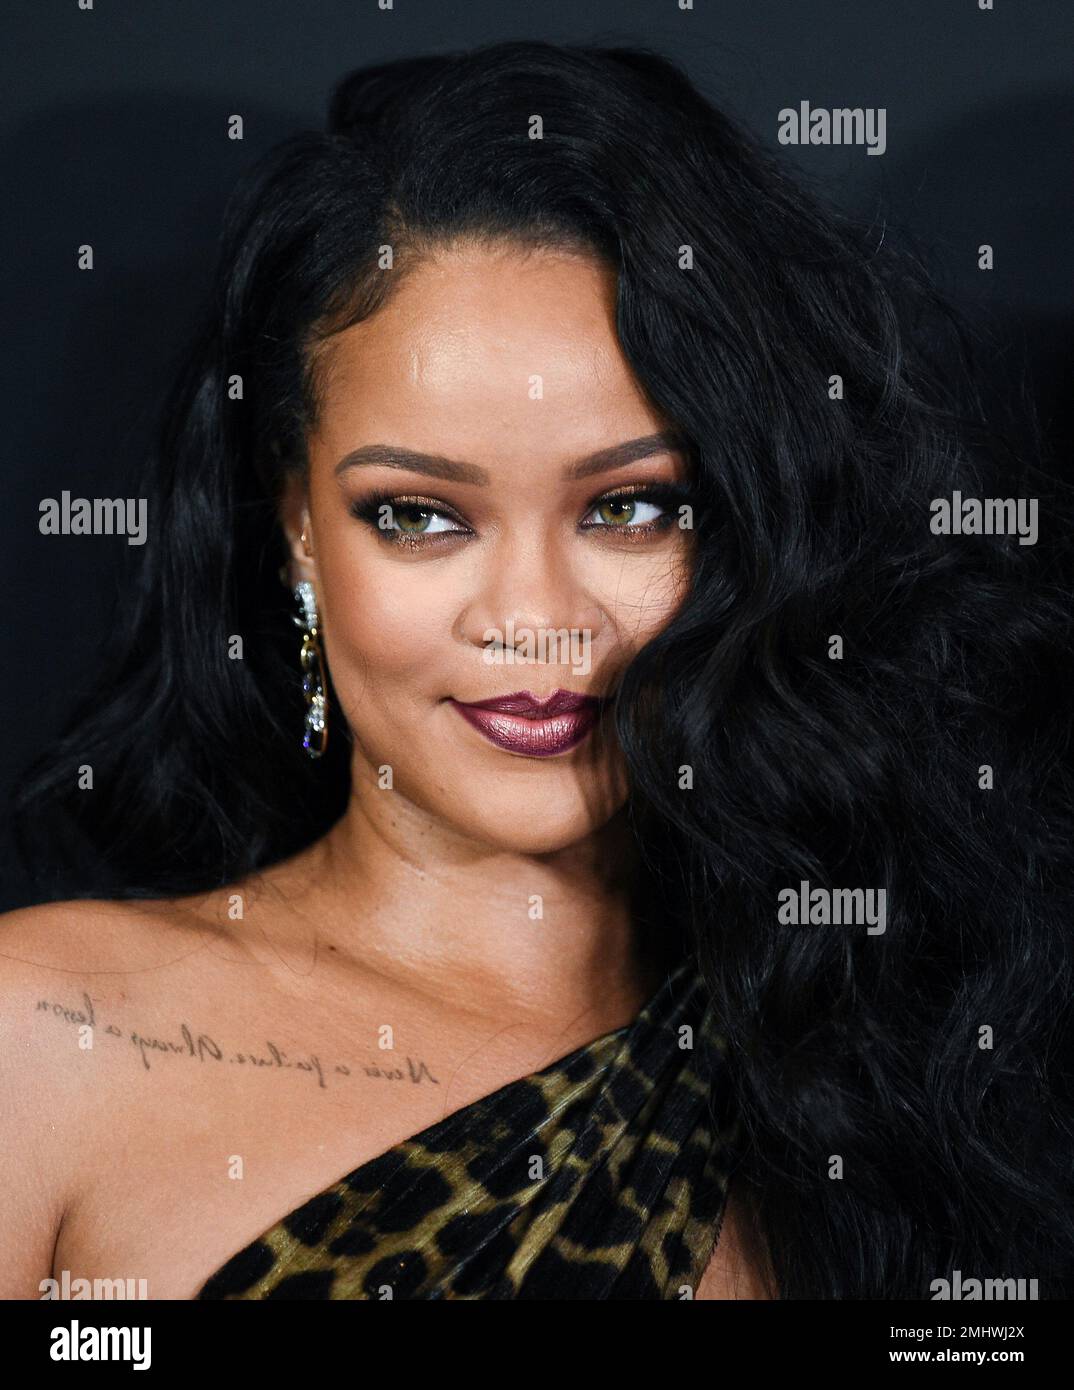 Singer and fashion designer Rihanna attends the Rihanna book launch event  at the Guggenheim Museum on Friday, Oct. 11, 2019, in New York. (Photo by  Evan Agostini/Invision/AP Stock Photo - Alamy